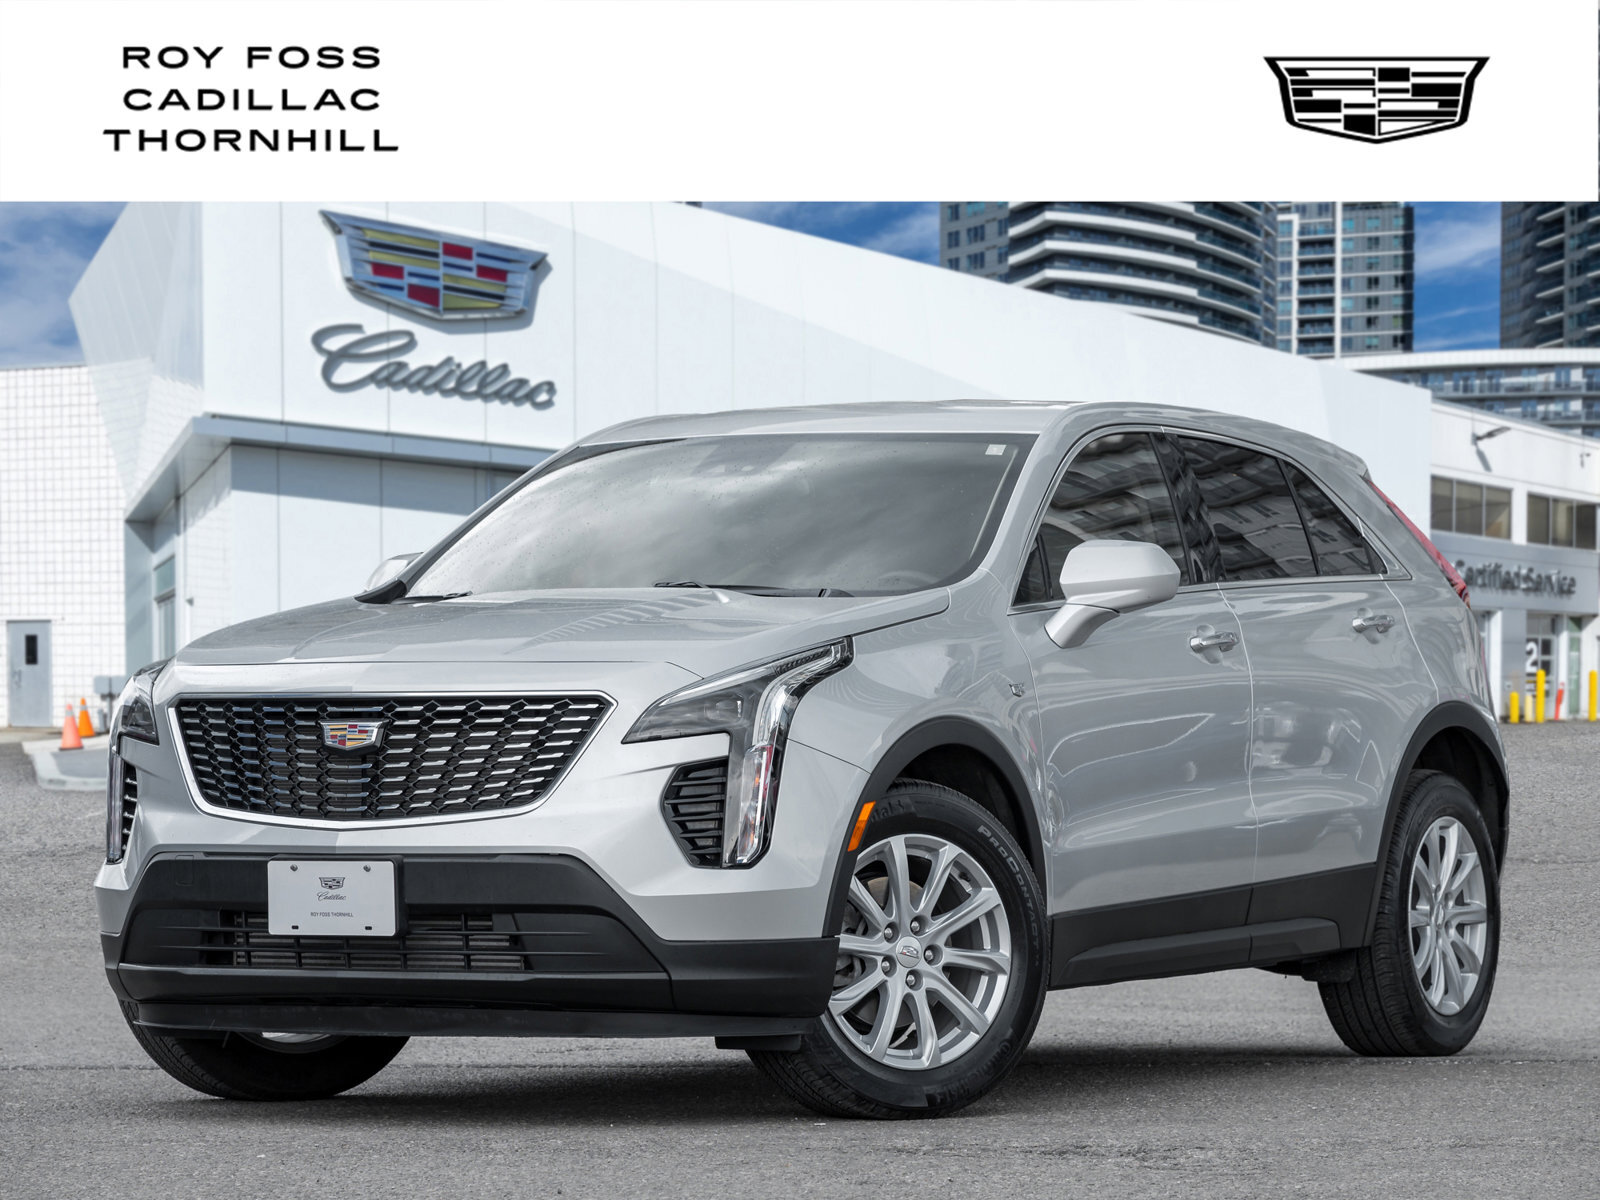 2022 Cadillac XT4 RATES STARTING FROM 4.99%+1 OWNER+LOW KM+CERTIFIED